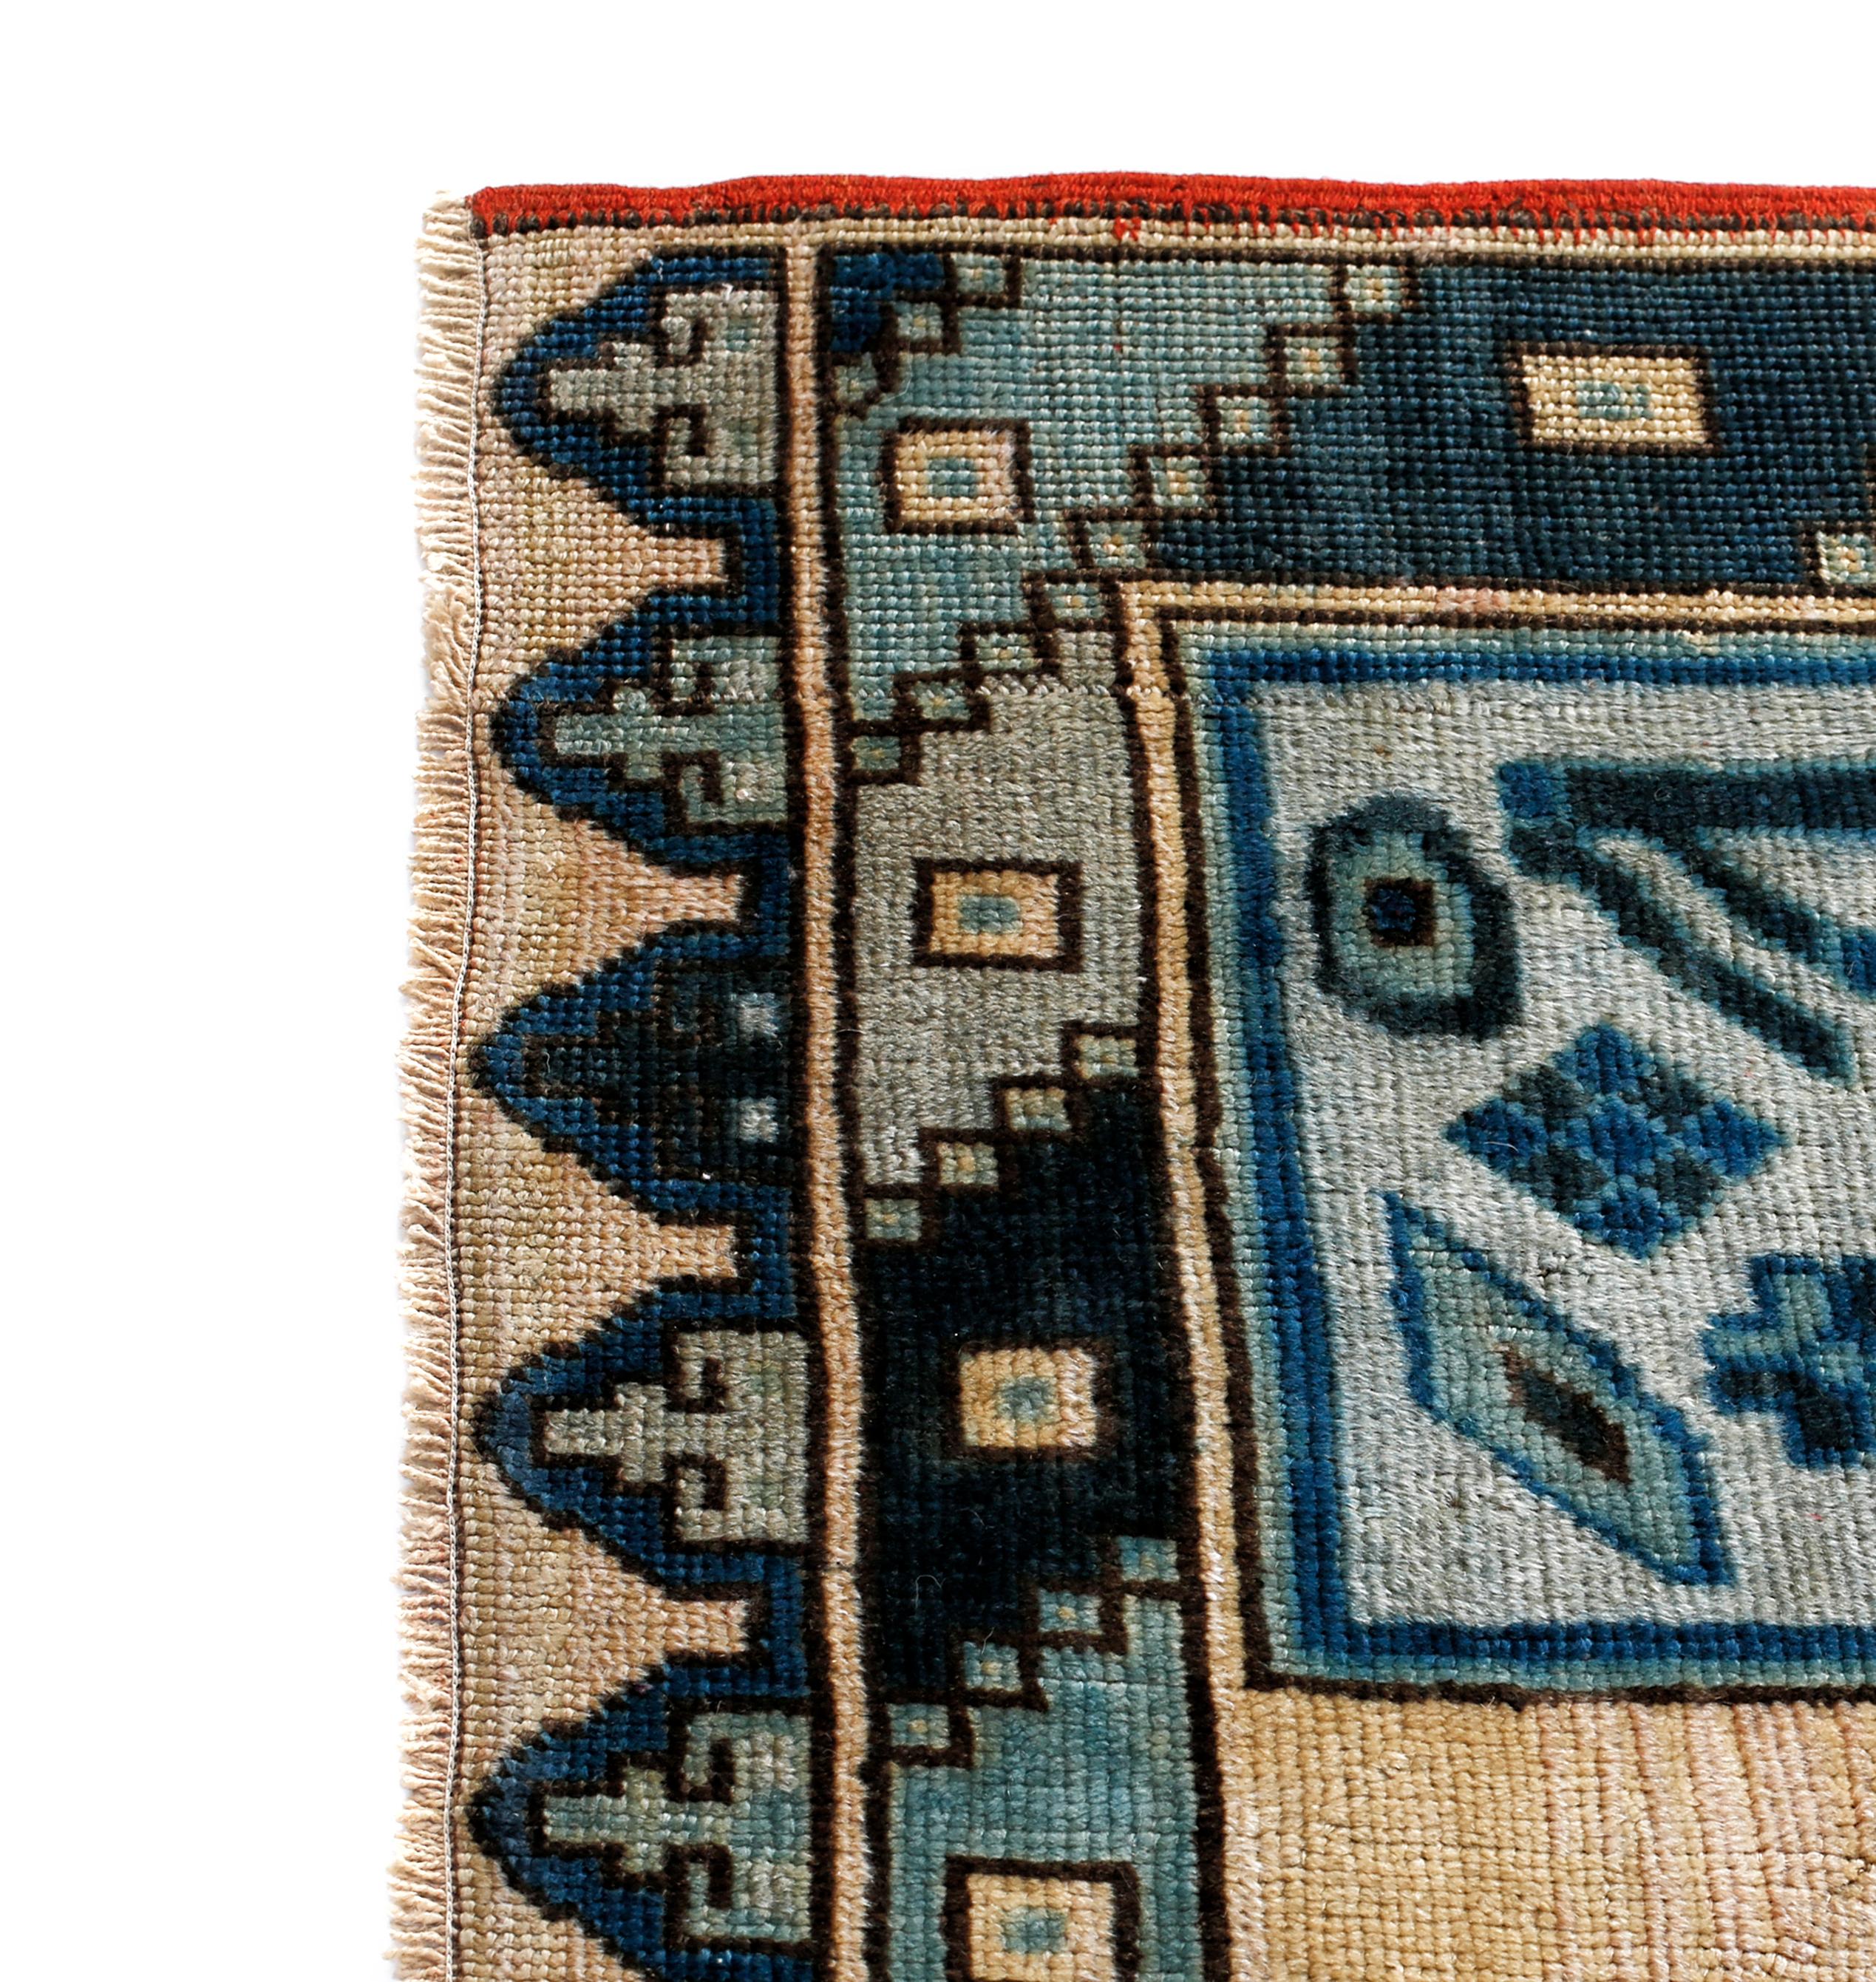 Anatolian rugs are hand knotted in the Central Anatolia or Asia Minor region of Turkey. The patterns are from ottoman era as well as modern Turkey. The central medallion used in this rug symbolizes the central authority of the Ottoman Sultans. In